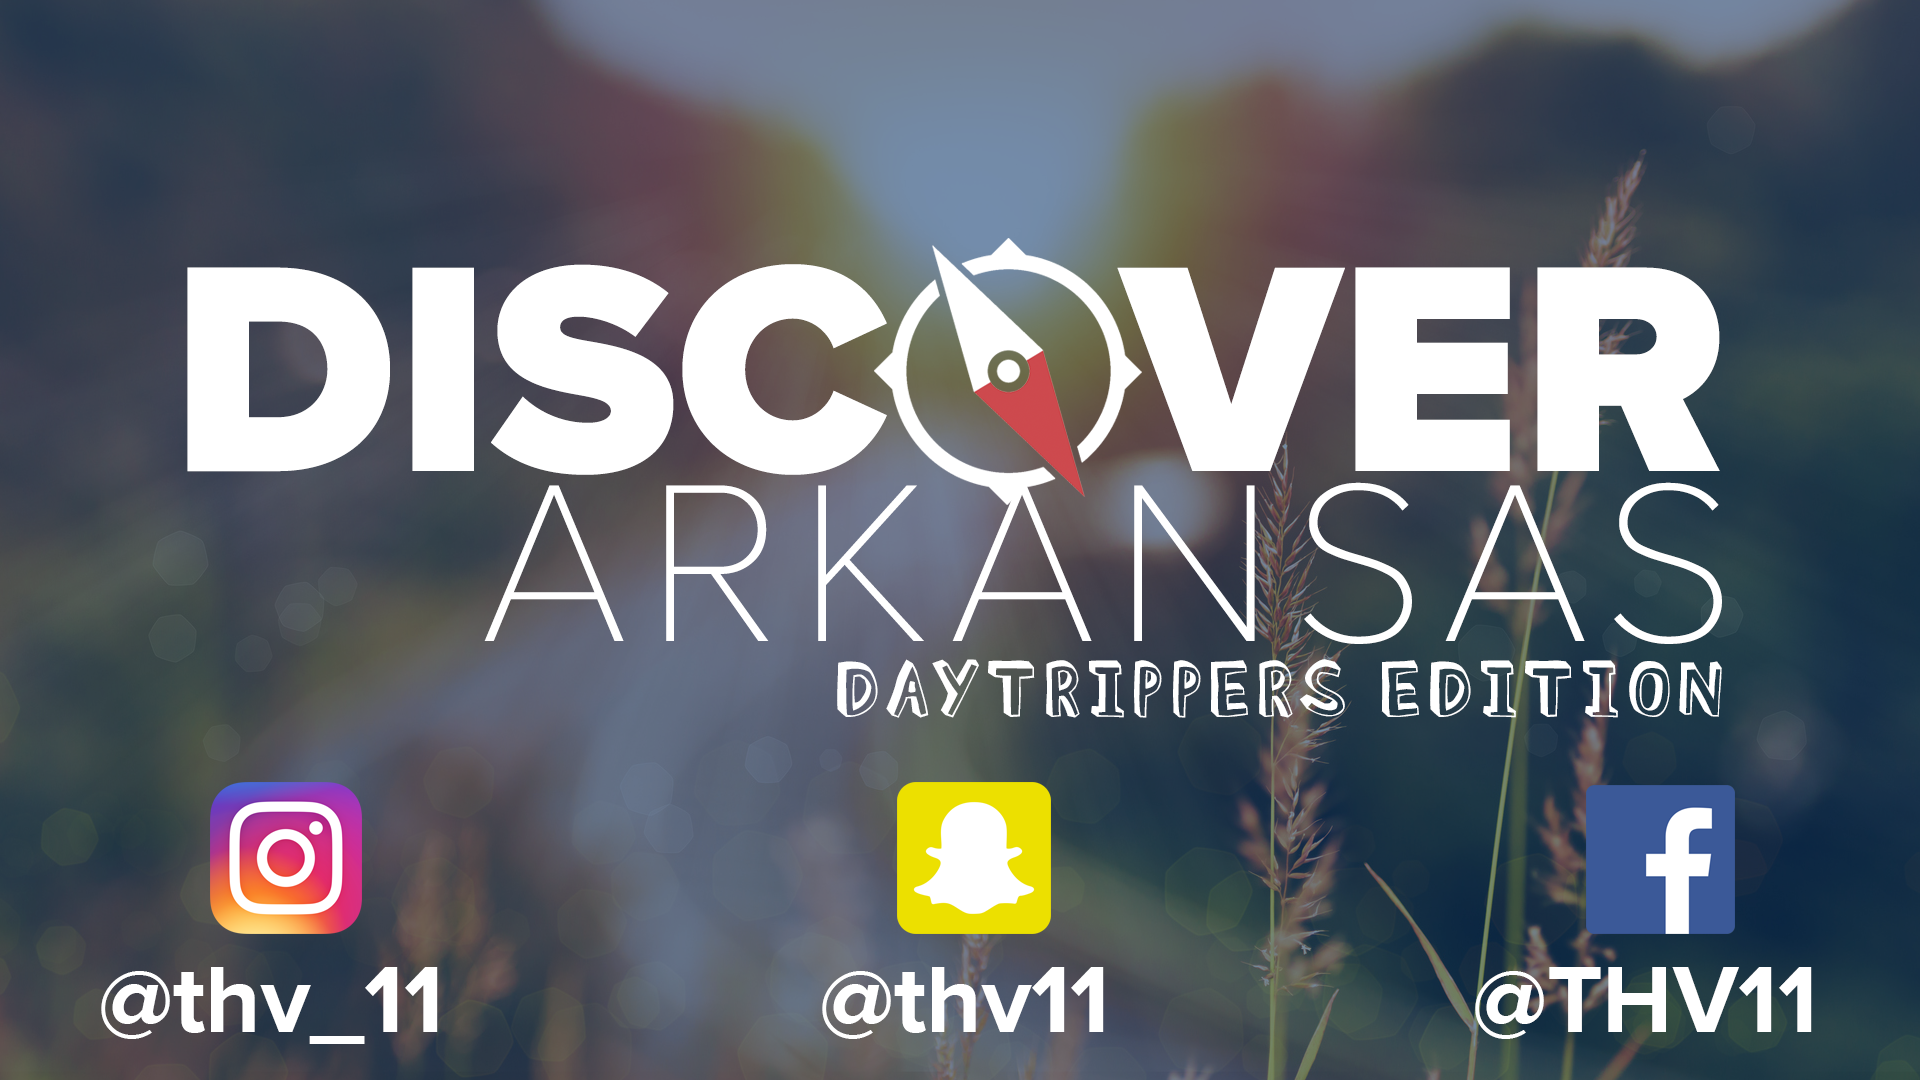 Every Friday in July, the THV11 crew is taking a DAY TRIP! And we're bringing you with us!